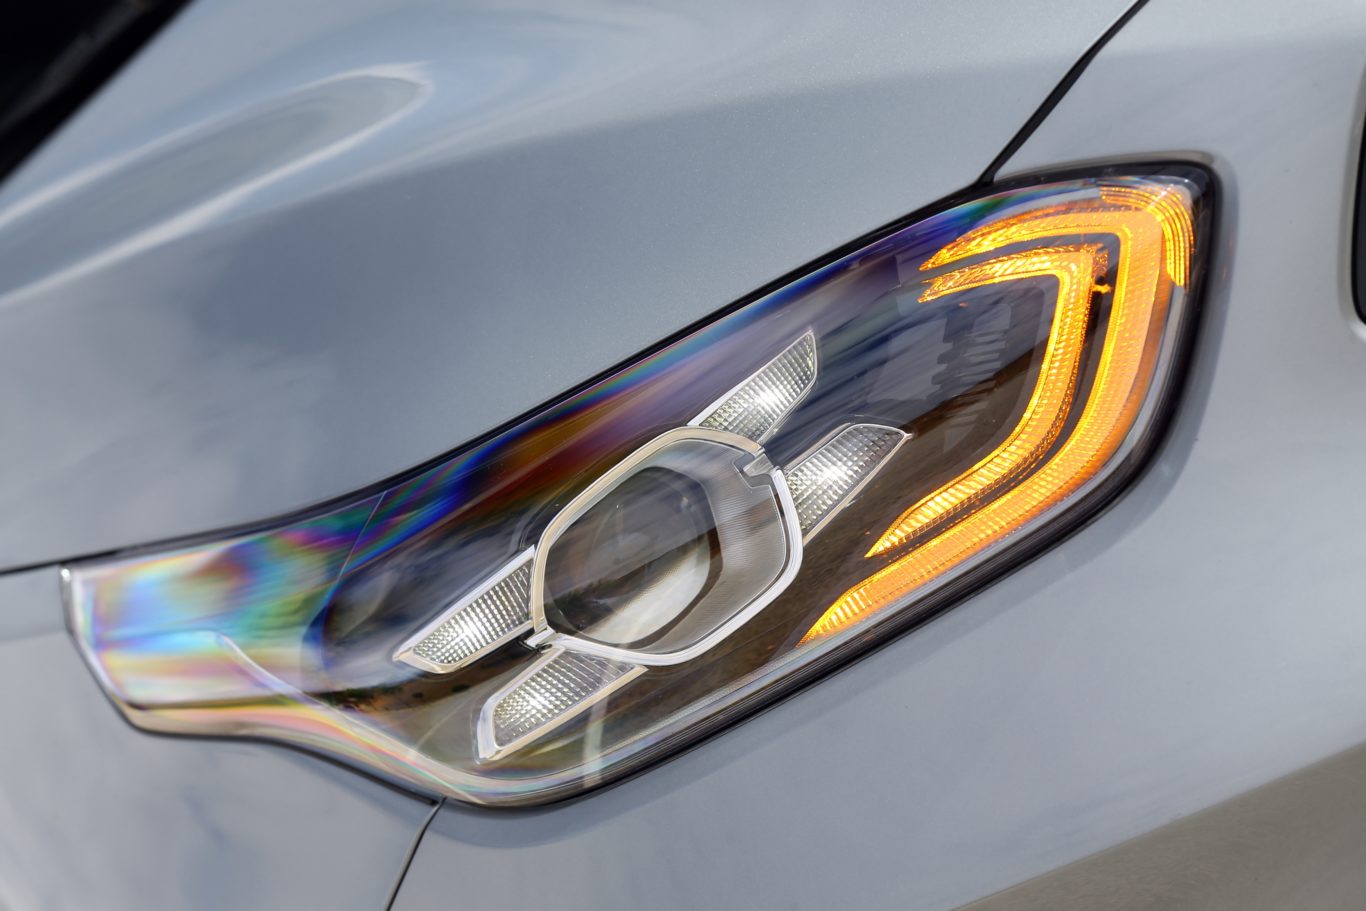 The new Ceed benefits from LED running lights 